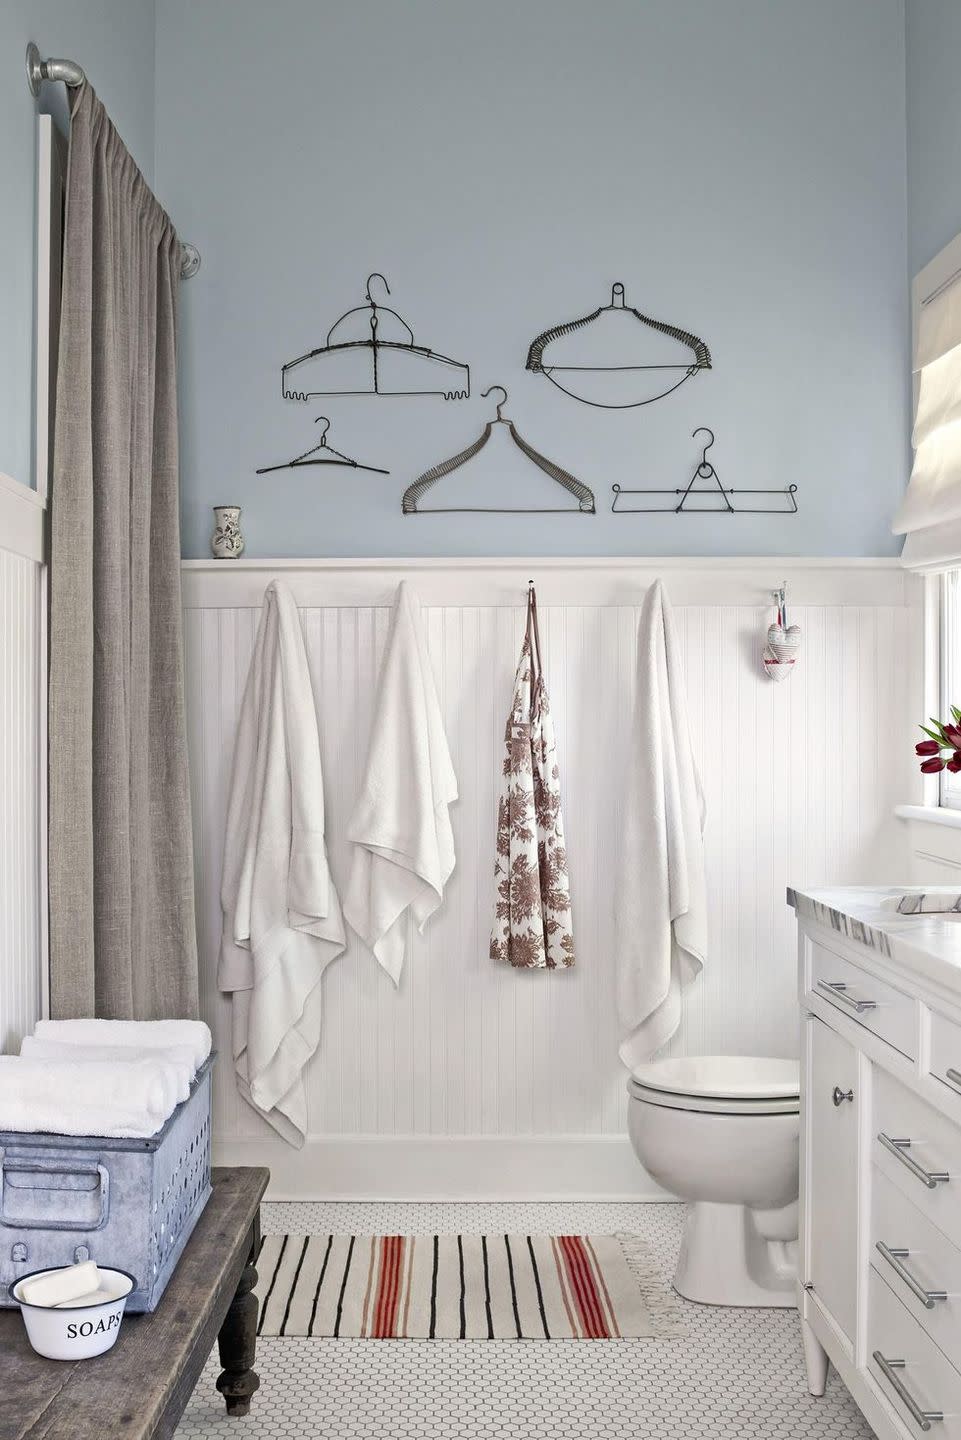 bathroom floor tiled with small white hex tiles, with white beadboard wainscoting and pale blue upper walls